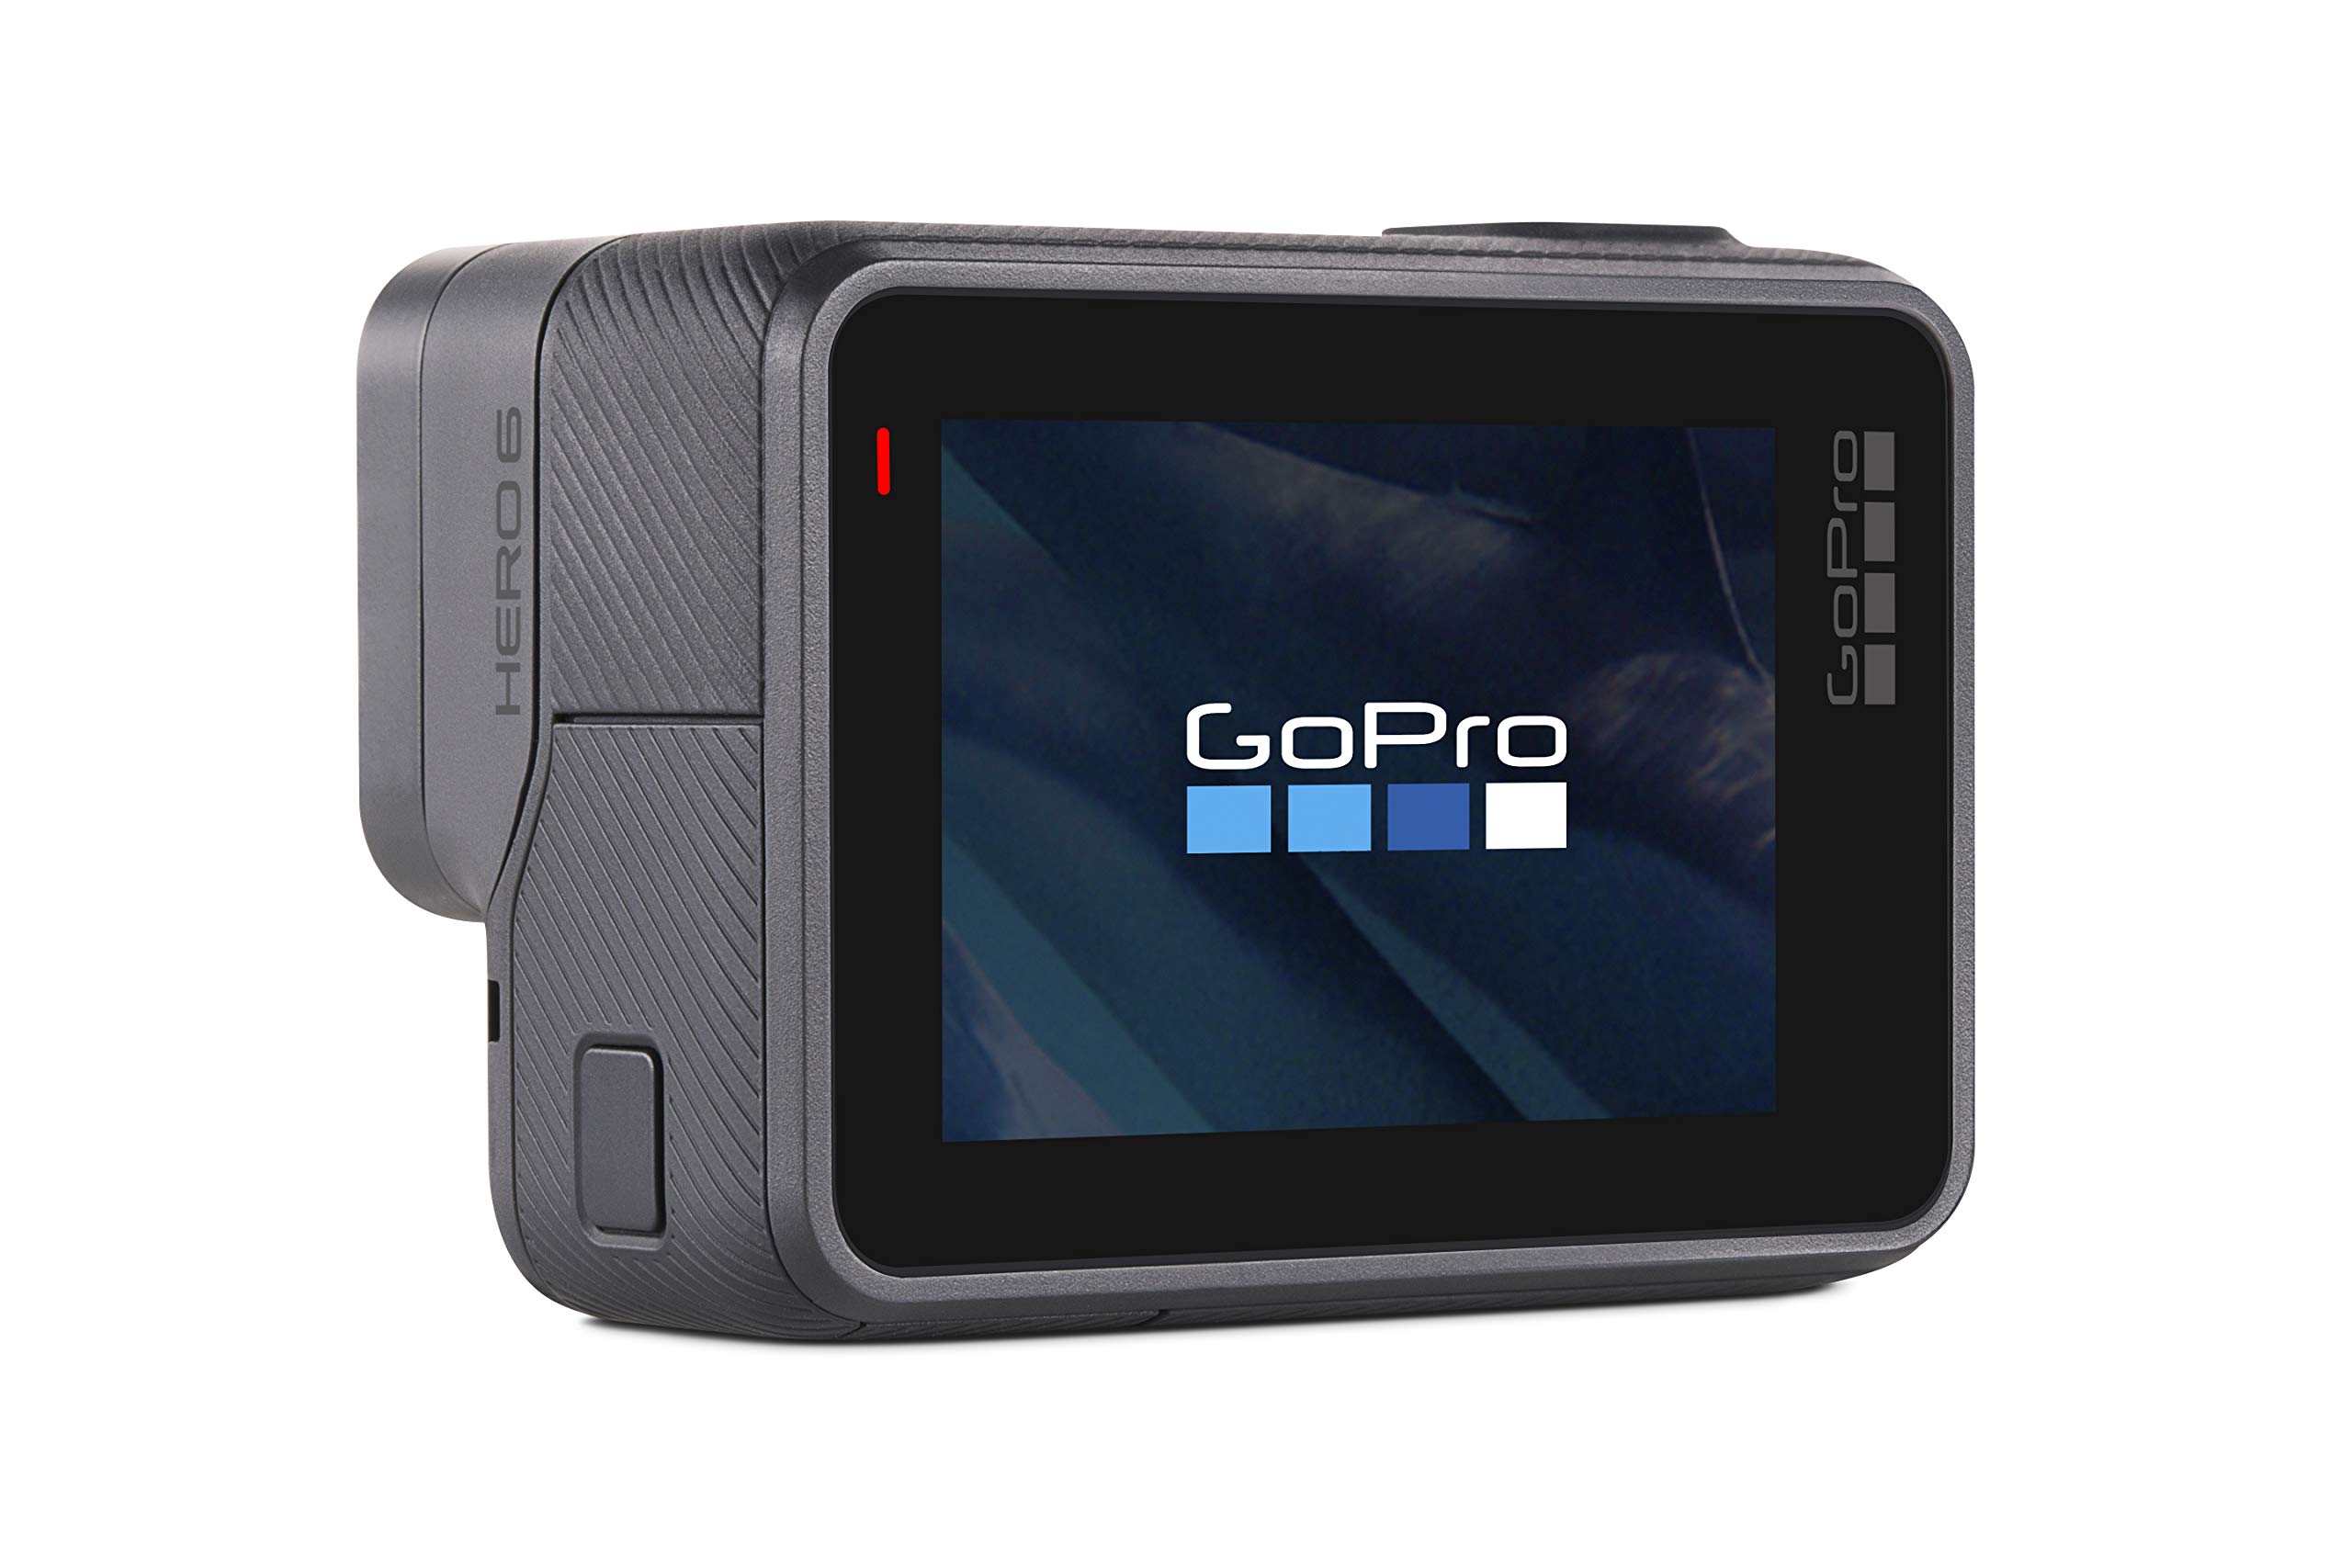 GoPro HERO6 Black — Waterproof Digital Action Camera for Travel with Touch Screen 4K HD Video 12MP Photos